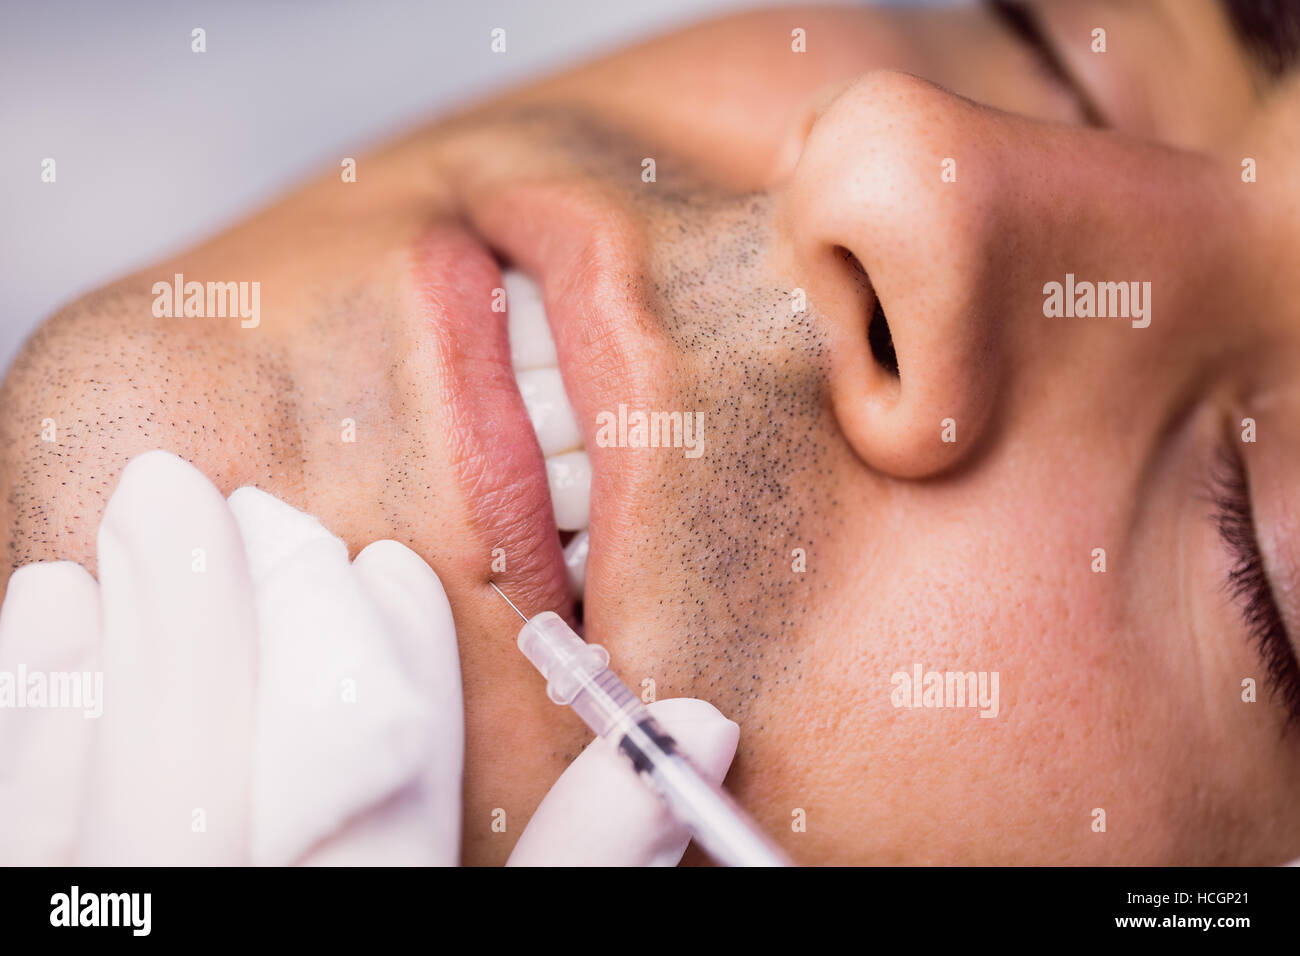 Man receiving botox injection on his lips Stock Photo